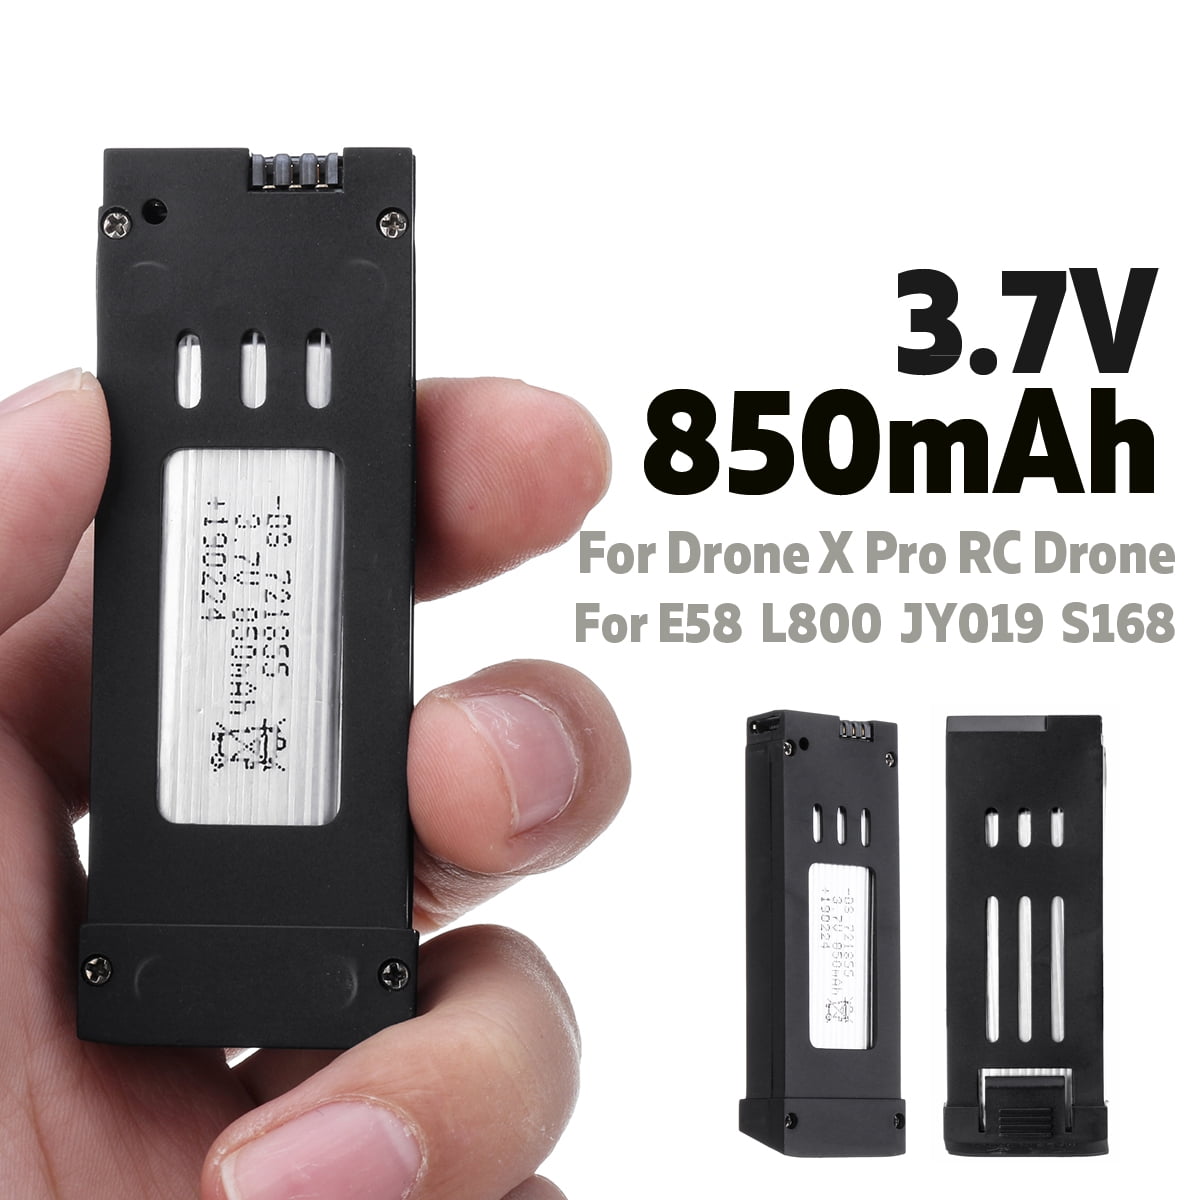 Drone X Pro Battery 3.7V 850mAh Lipo RC Drone Spare Parts Upgrade With Charger